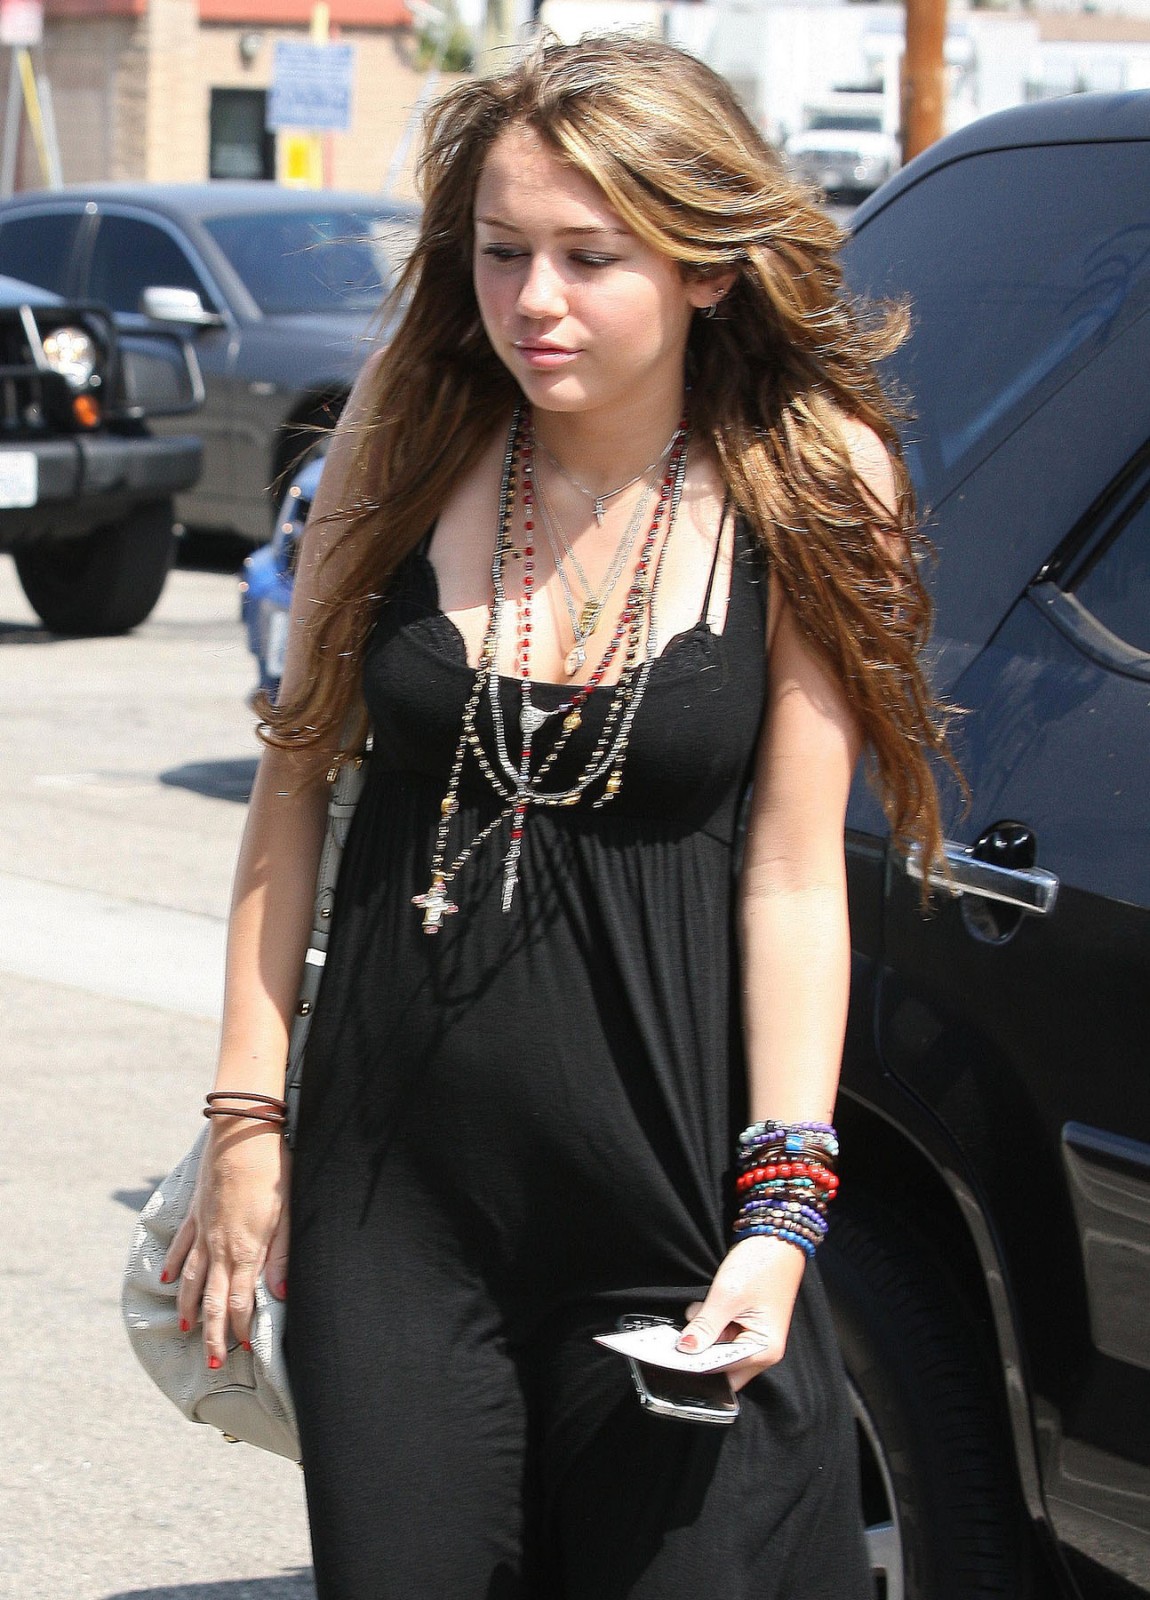 Miley-Cyrus-20090831_Out-n-About-Studio-City_May09_01120-1150x1600.jpg